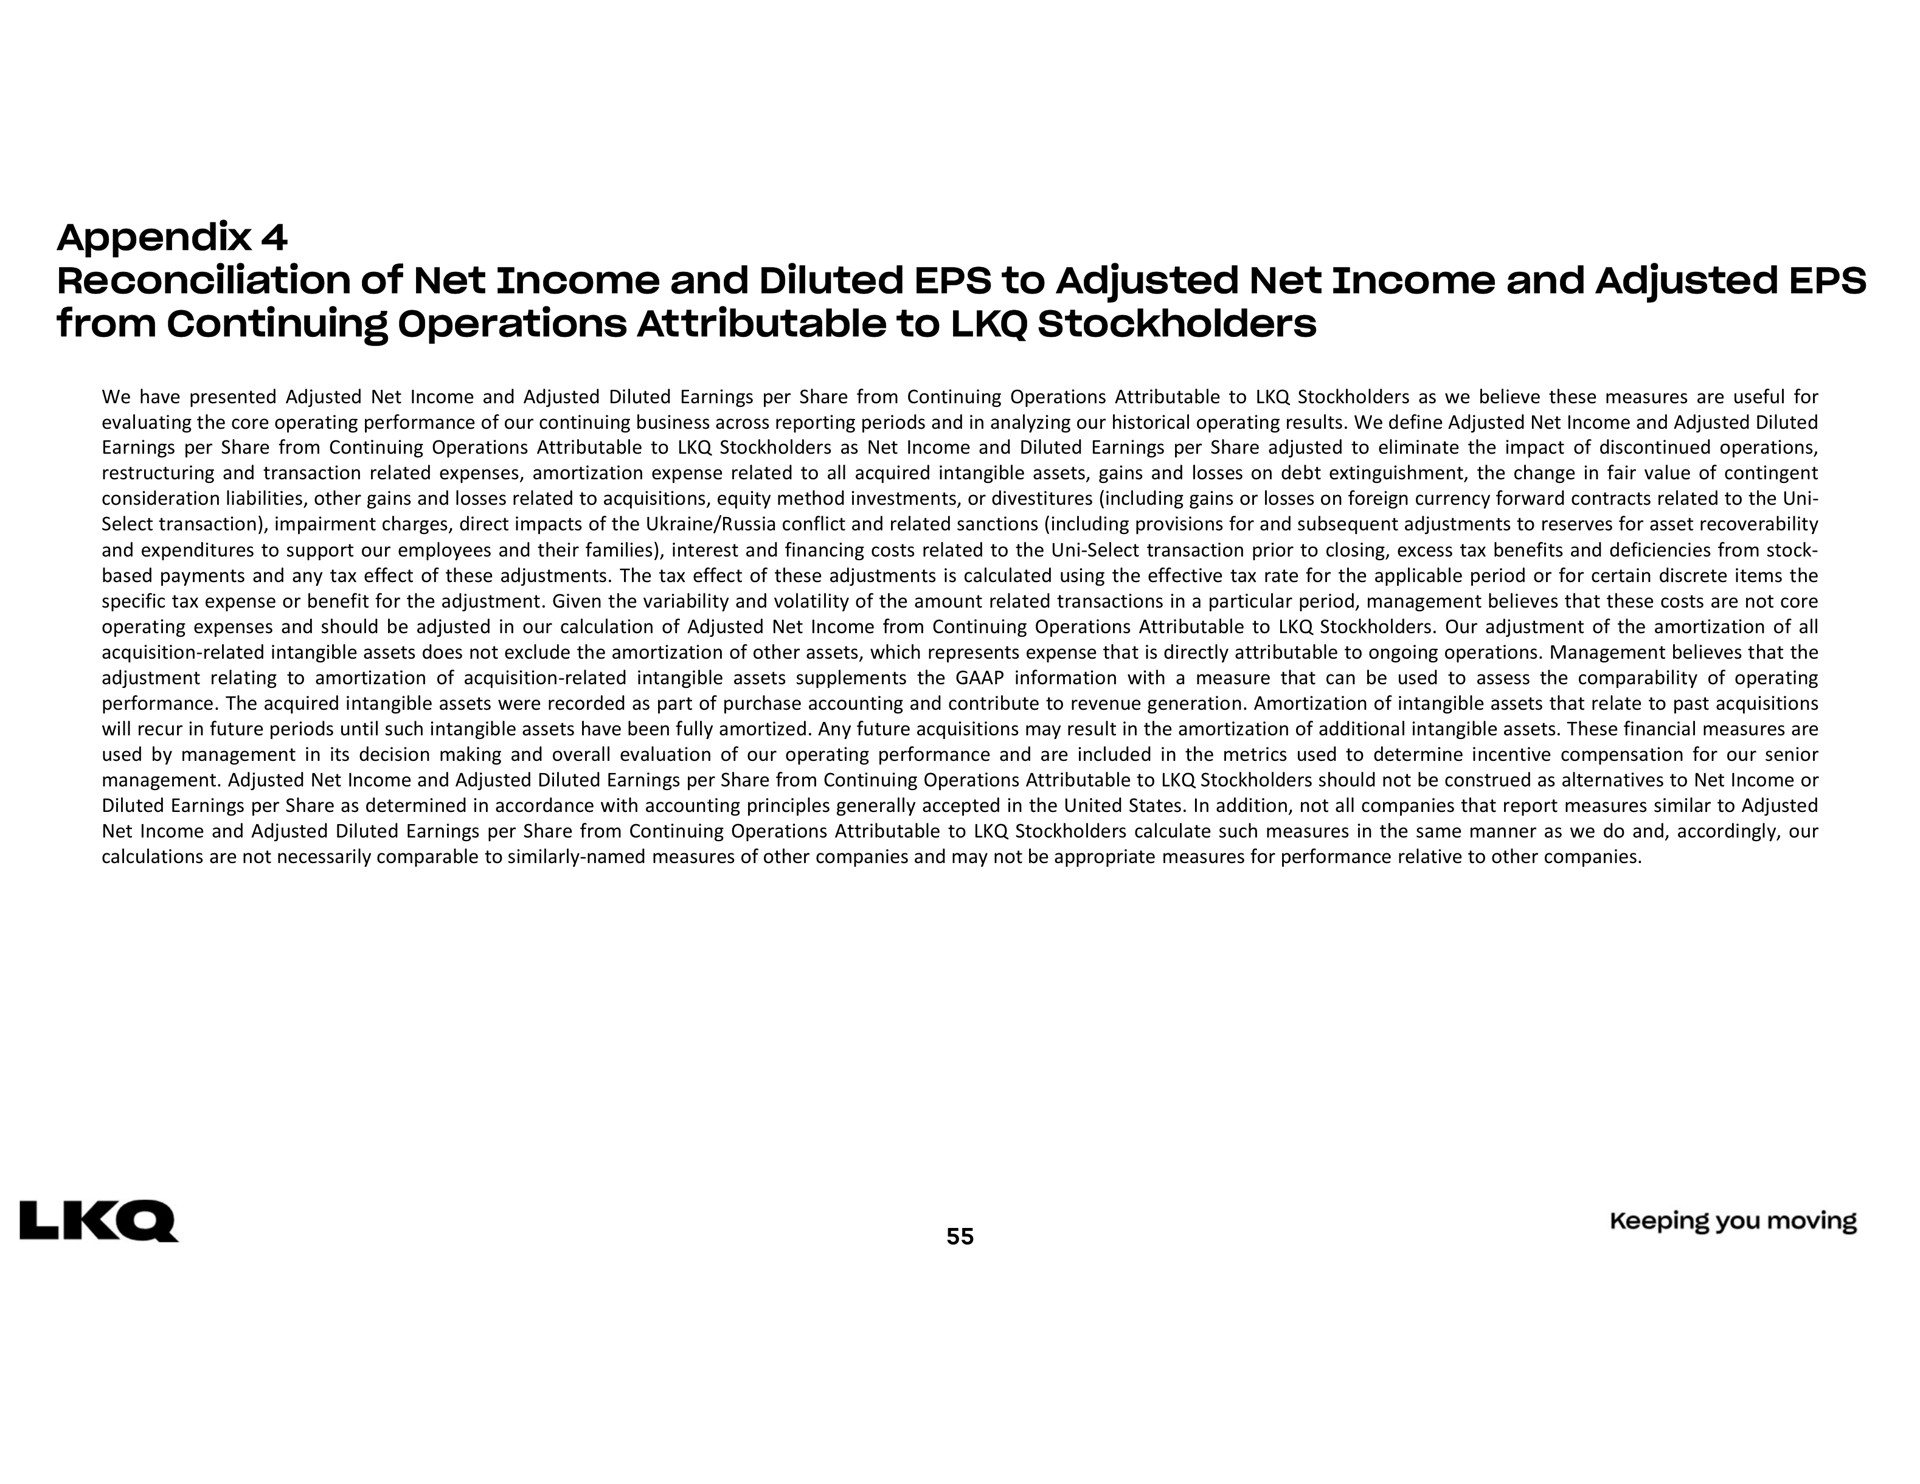 appendix reconciliation of net income and diluted to adjusted net income and adjusted from continuing operations attributable to stockholders | LKQ